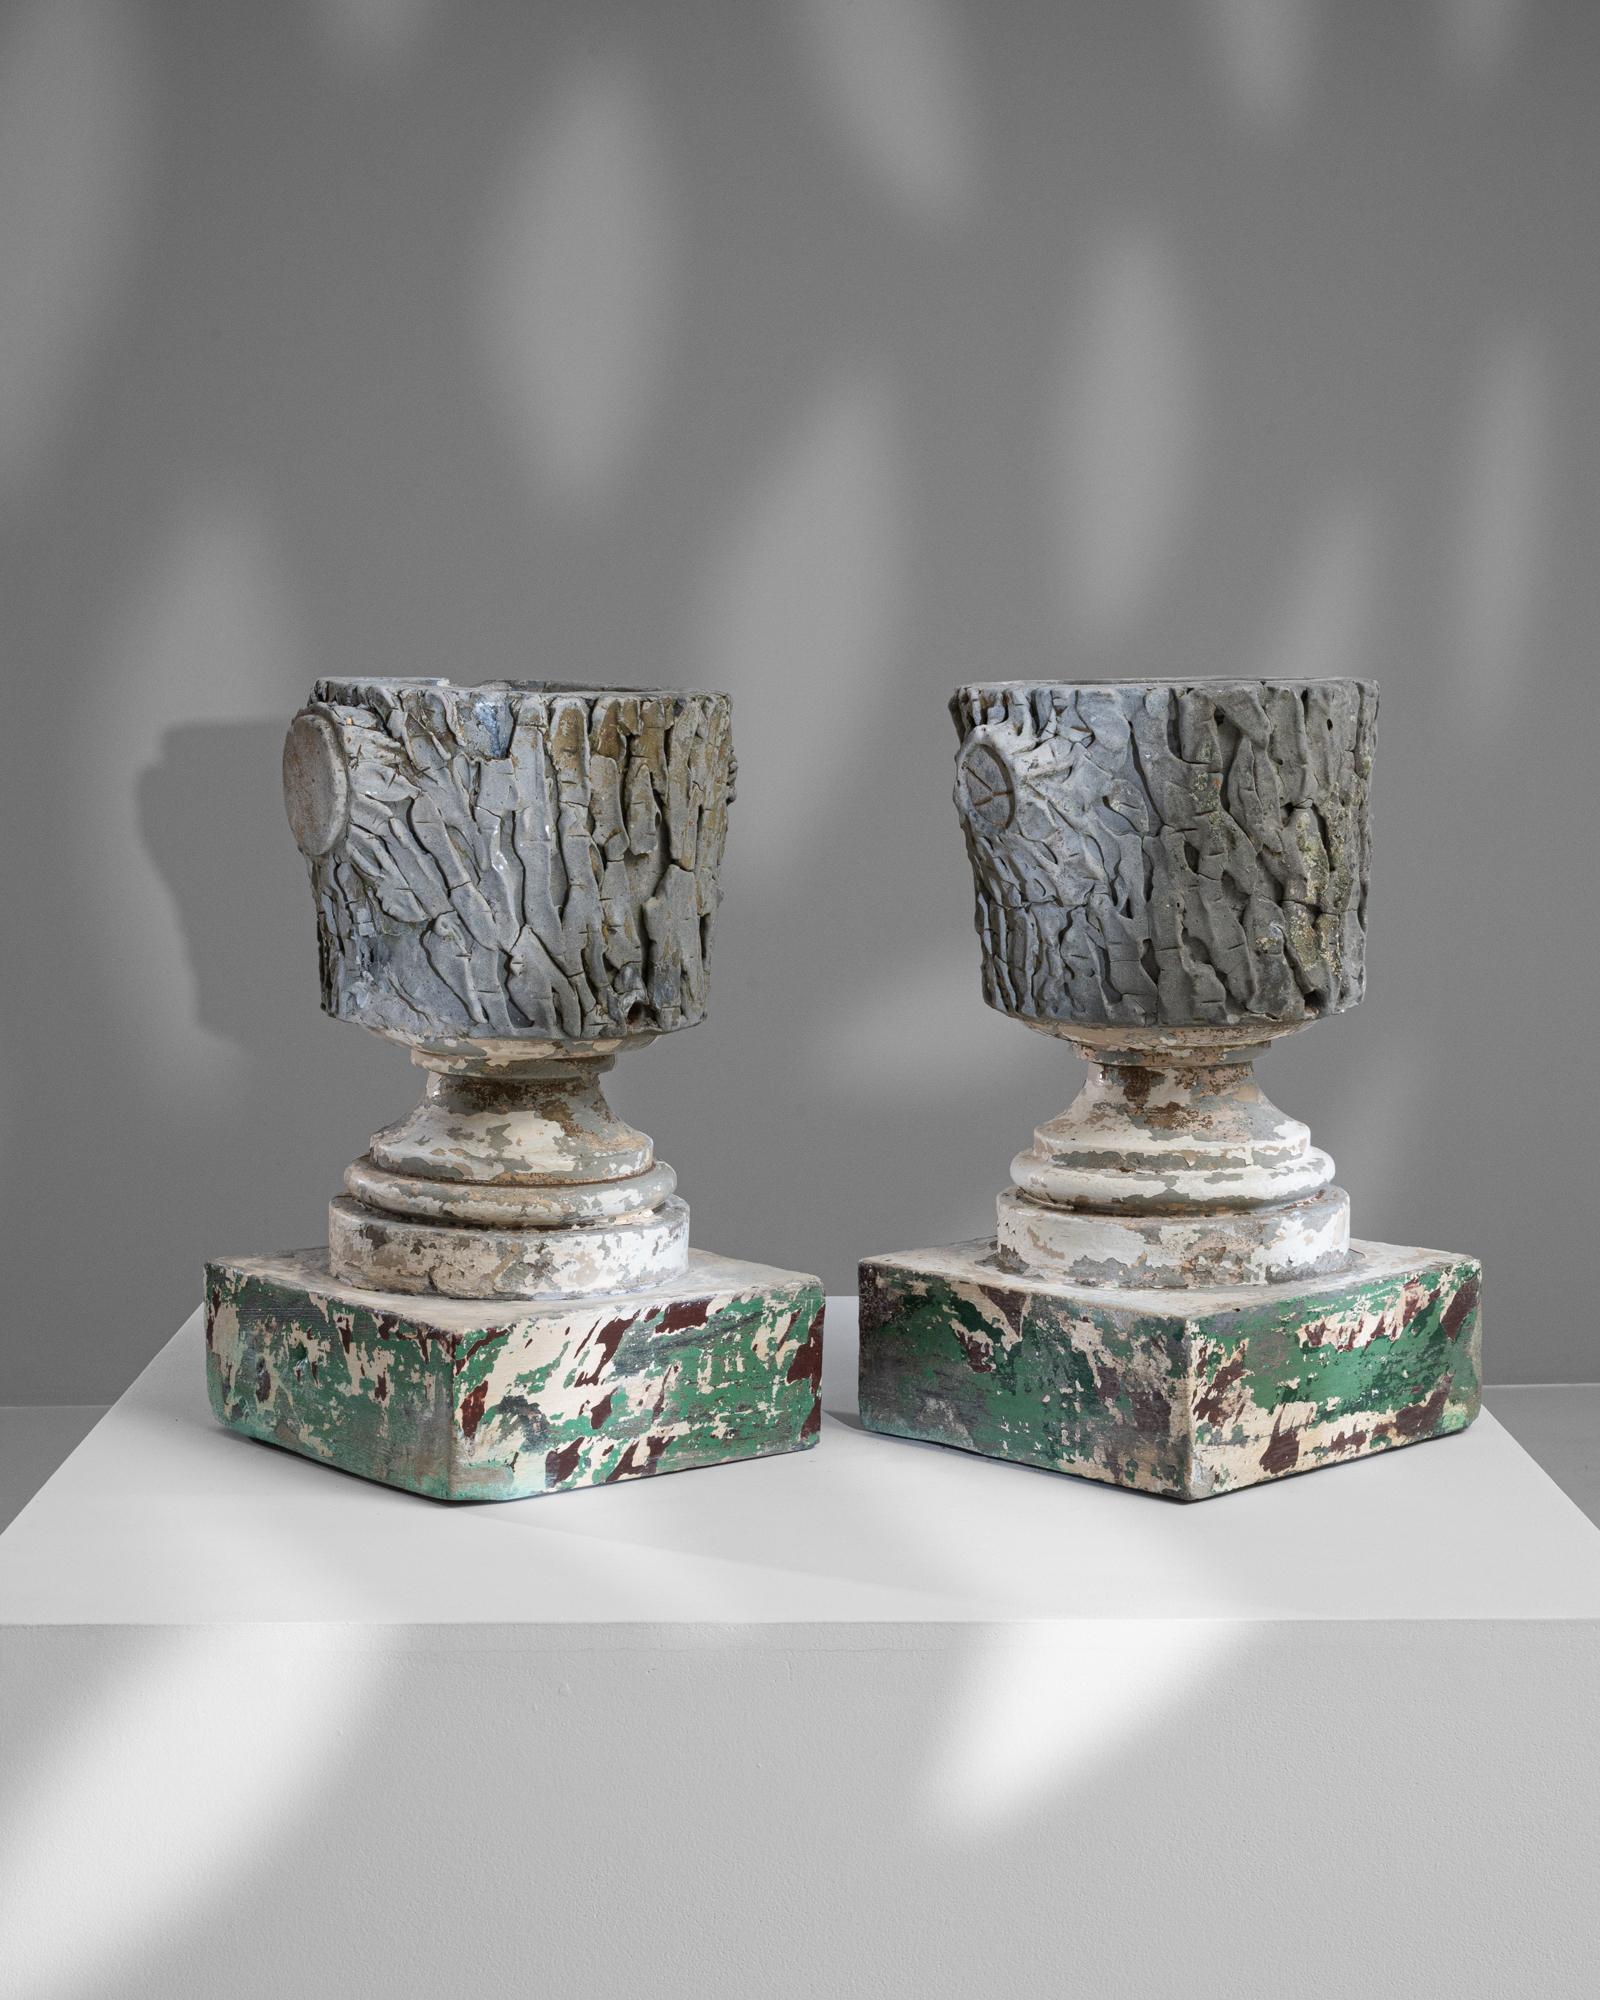 20th Century French Concrete Planters, a Pair For Sale 2